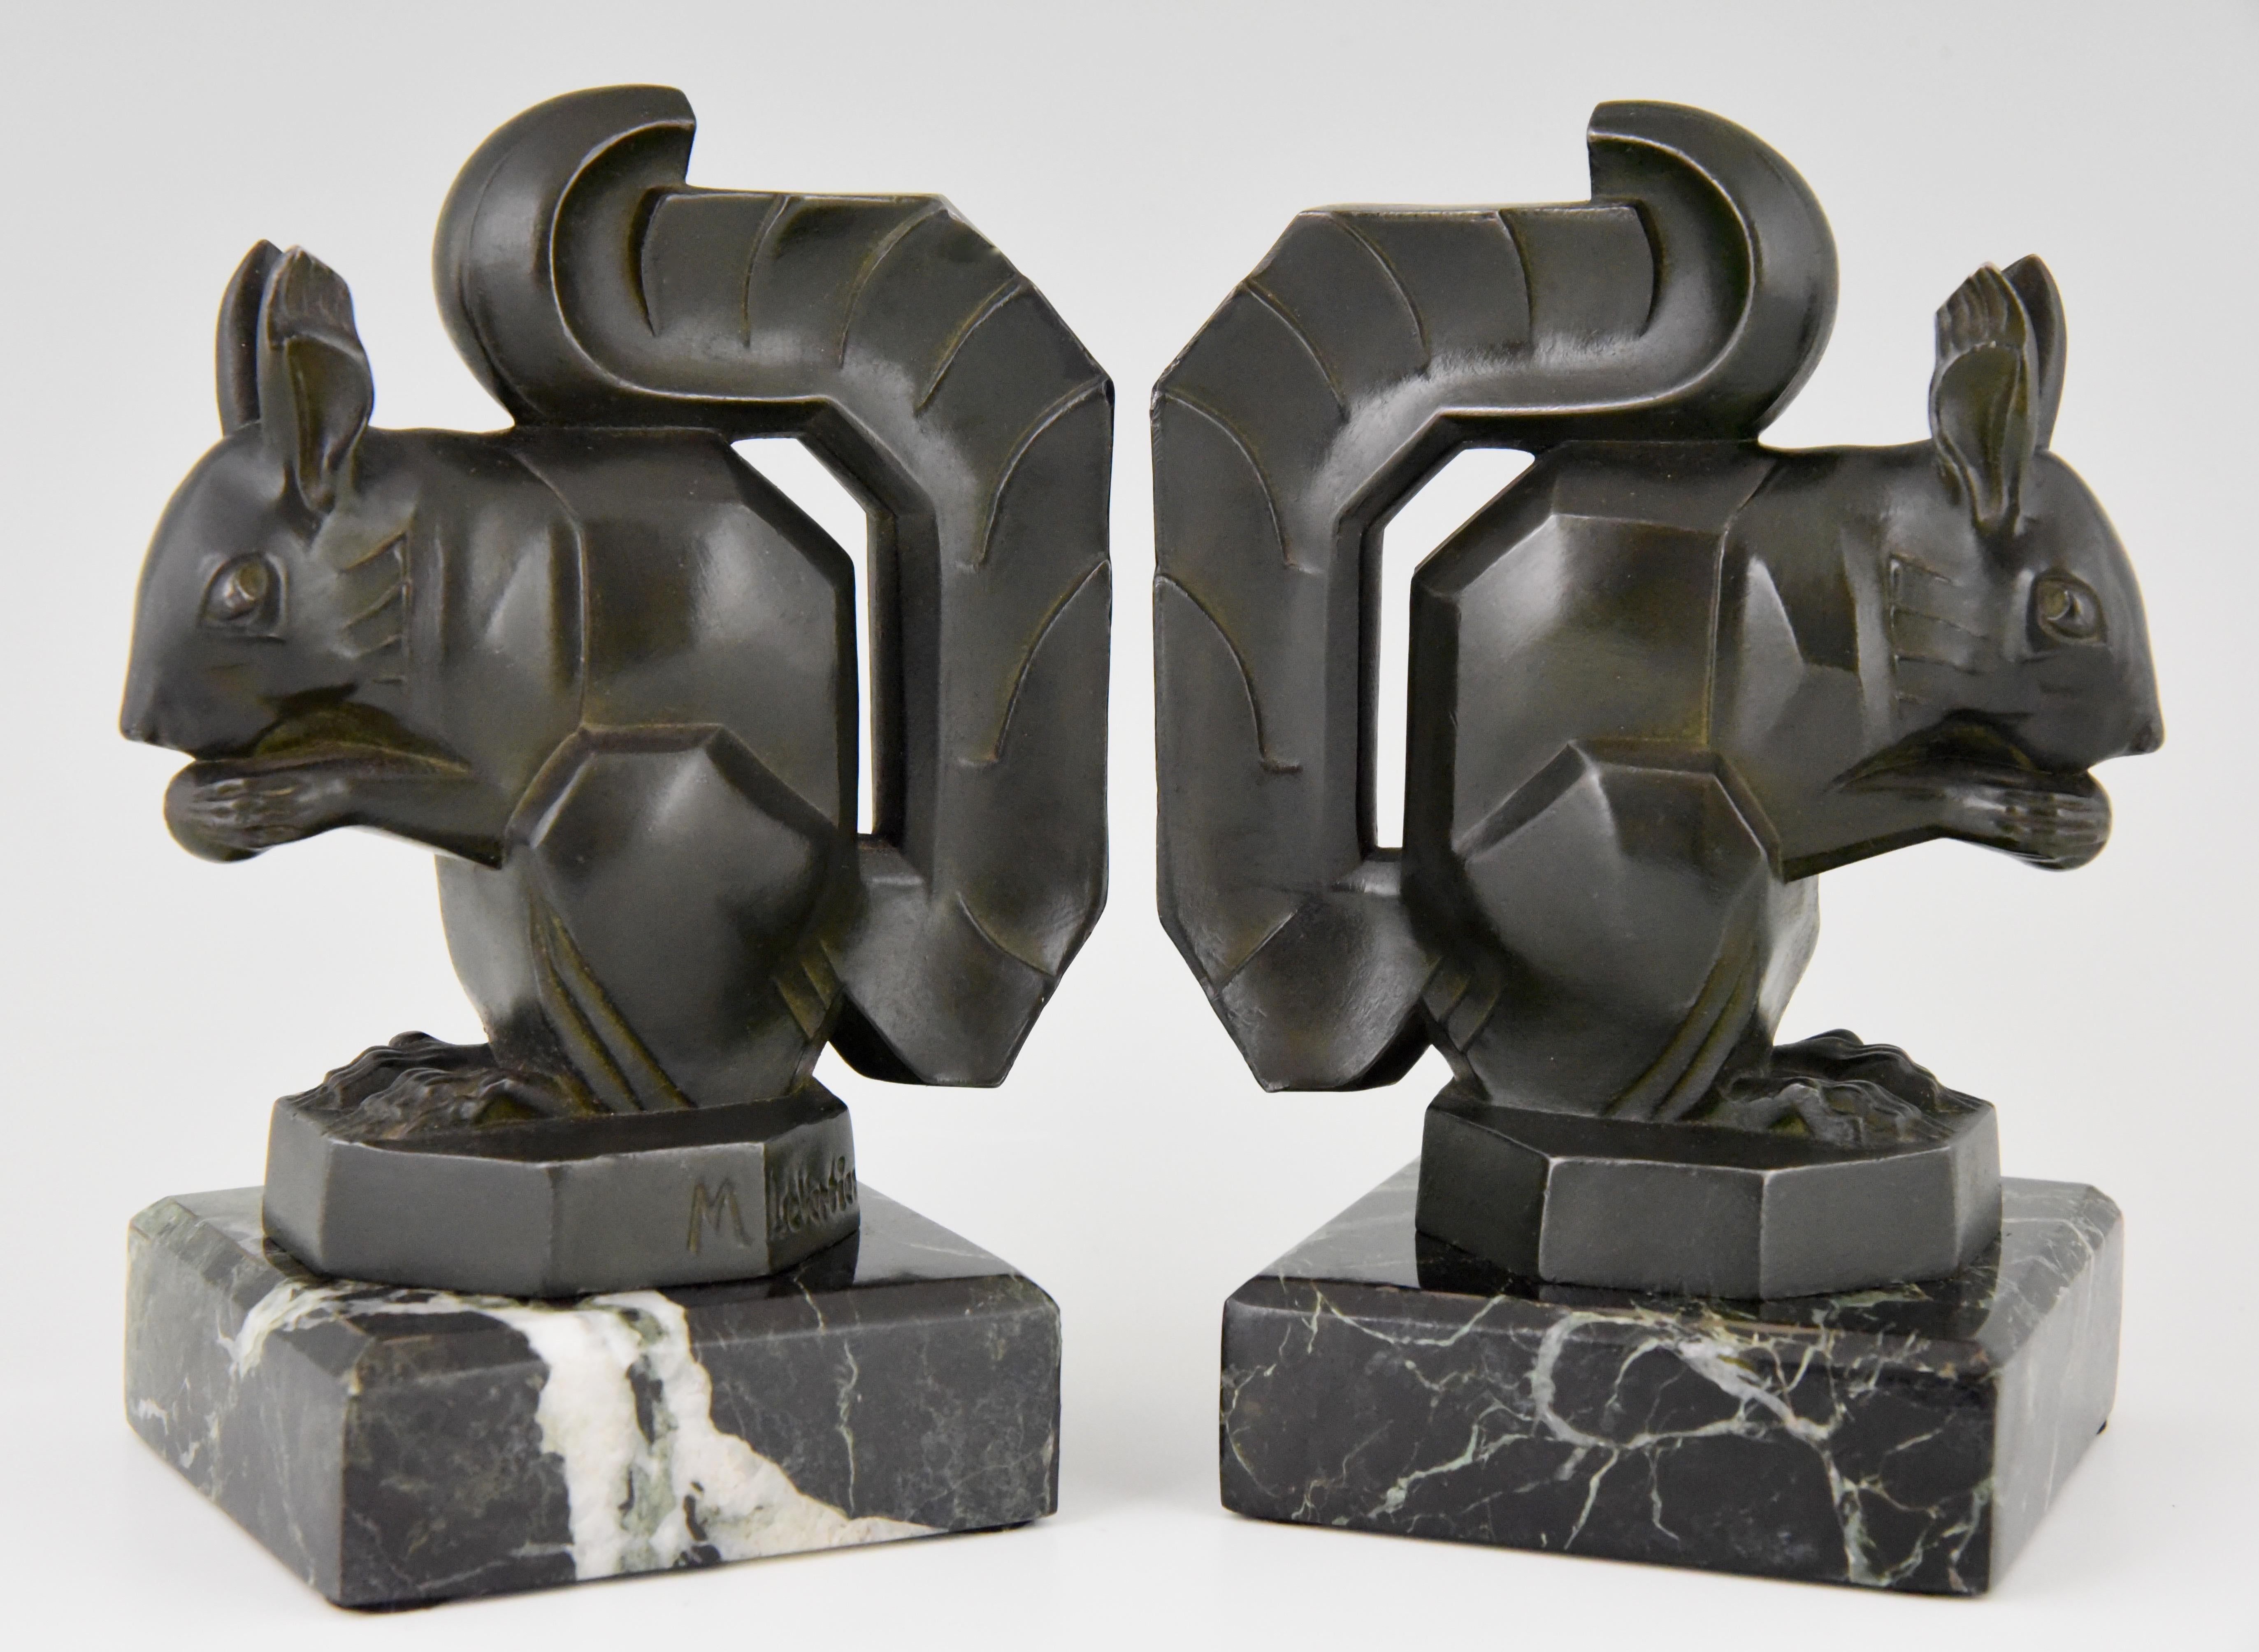 Lovely pair of typical Art Deco bookends with squirrels by Max Le Verrier, France, 1930.
Patinated art metal on a green marble base.